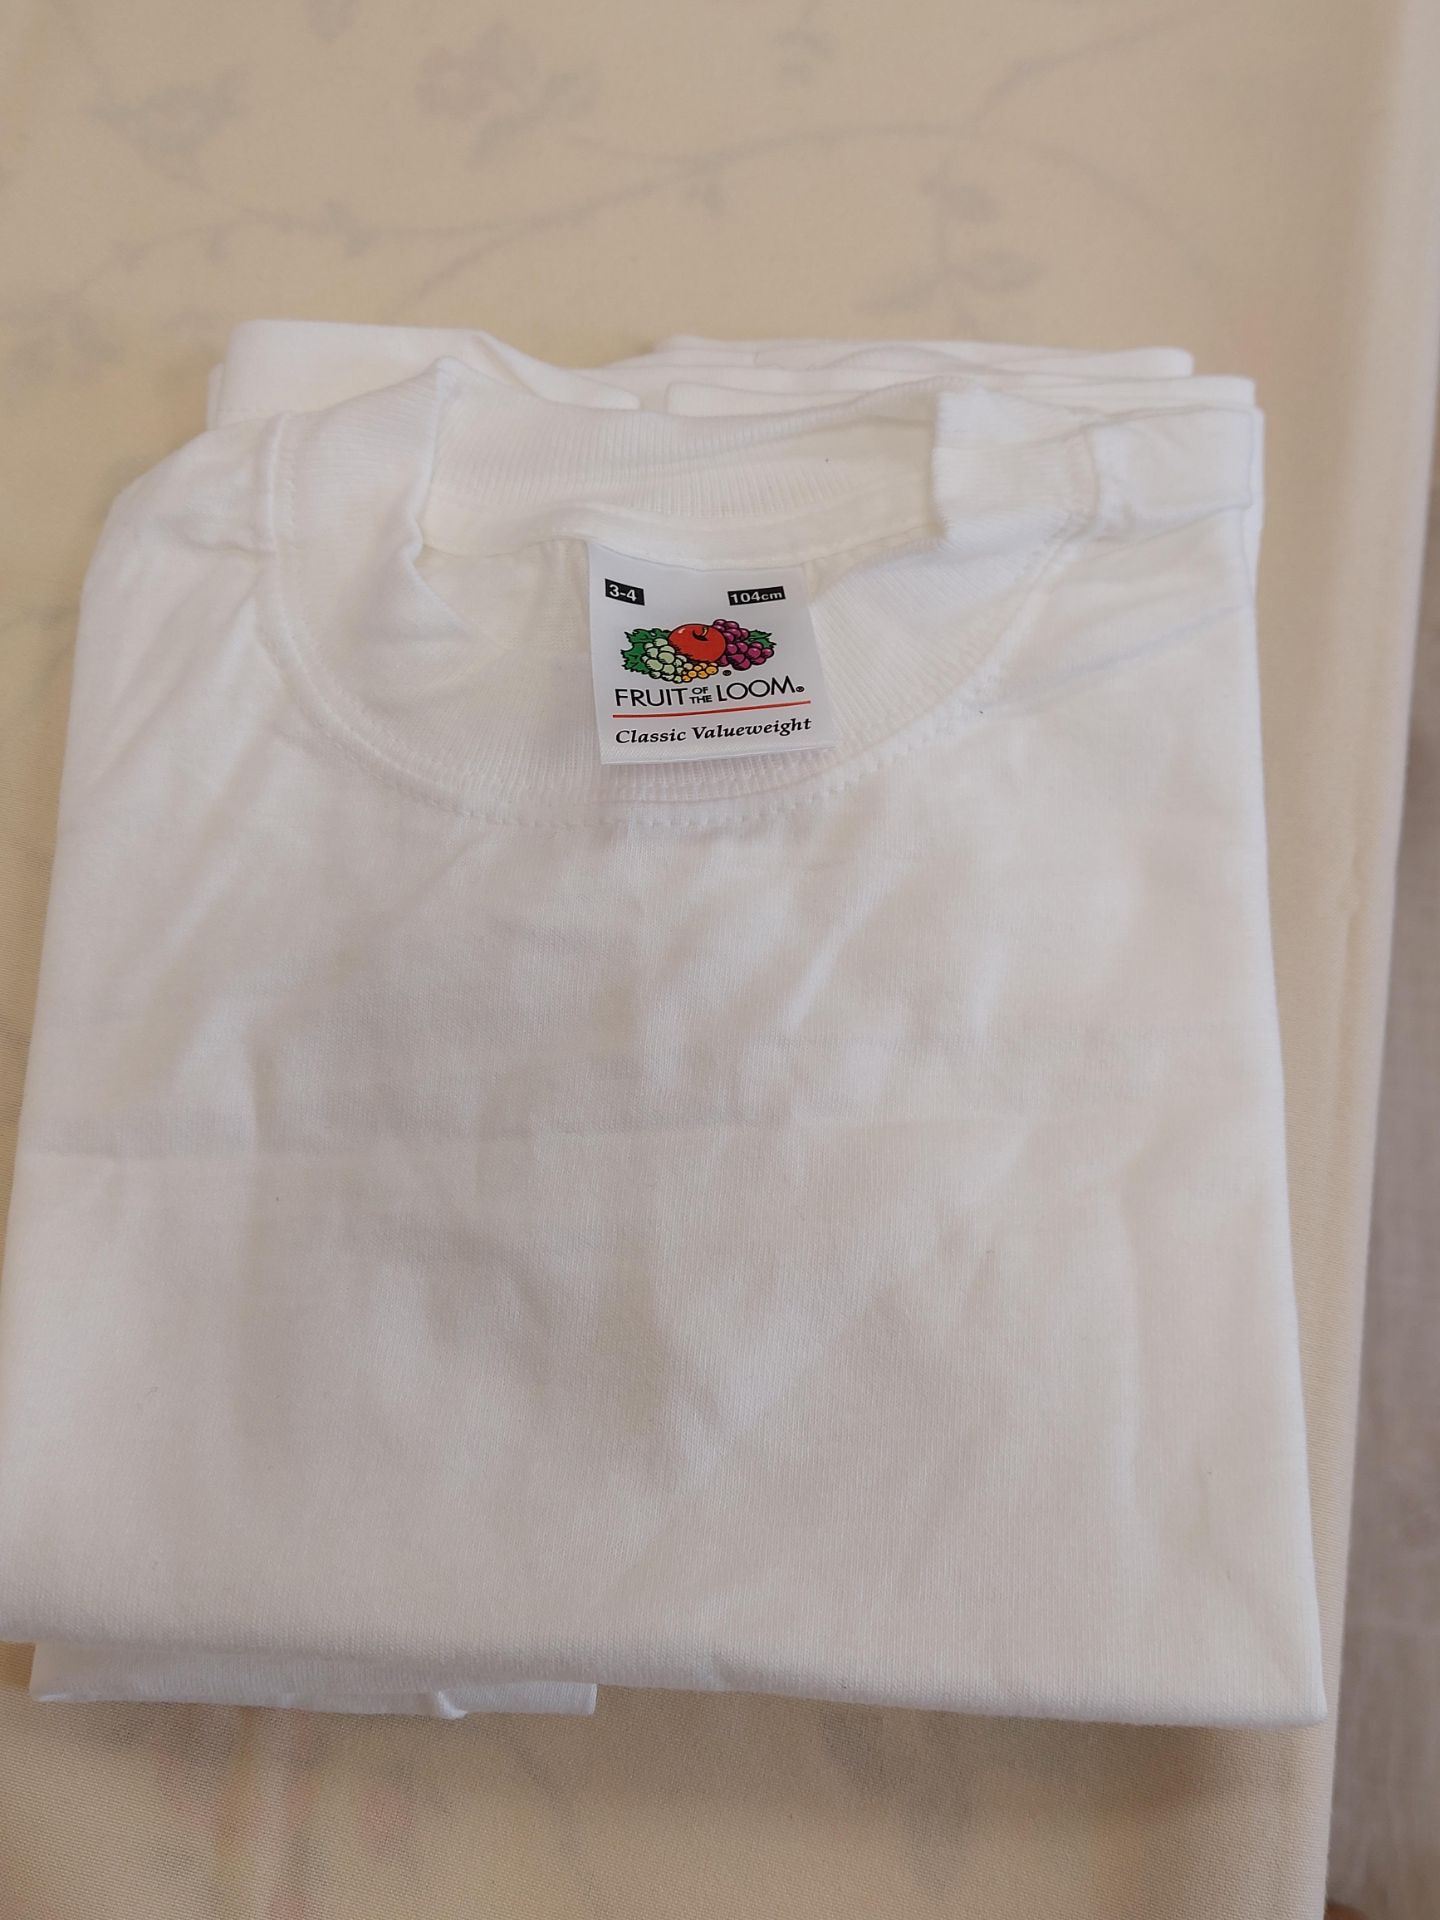 Pack of 6 White T-Shirts - Image 2 of 6